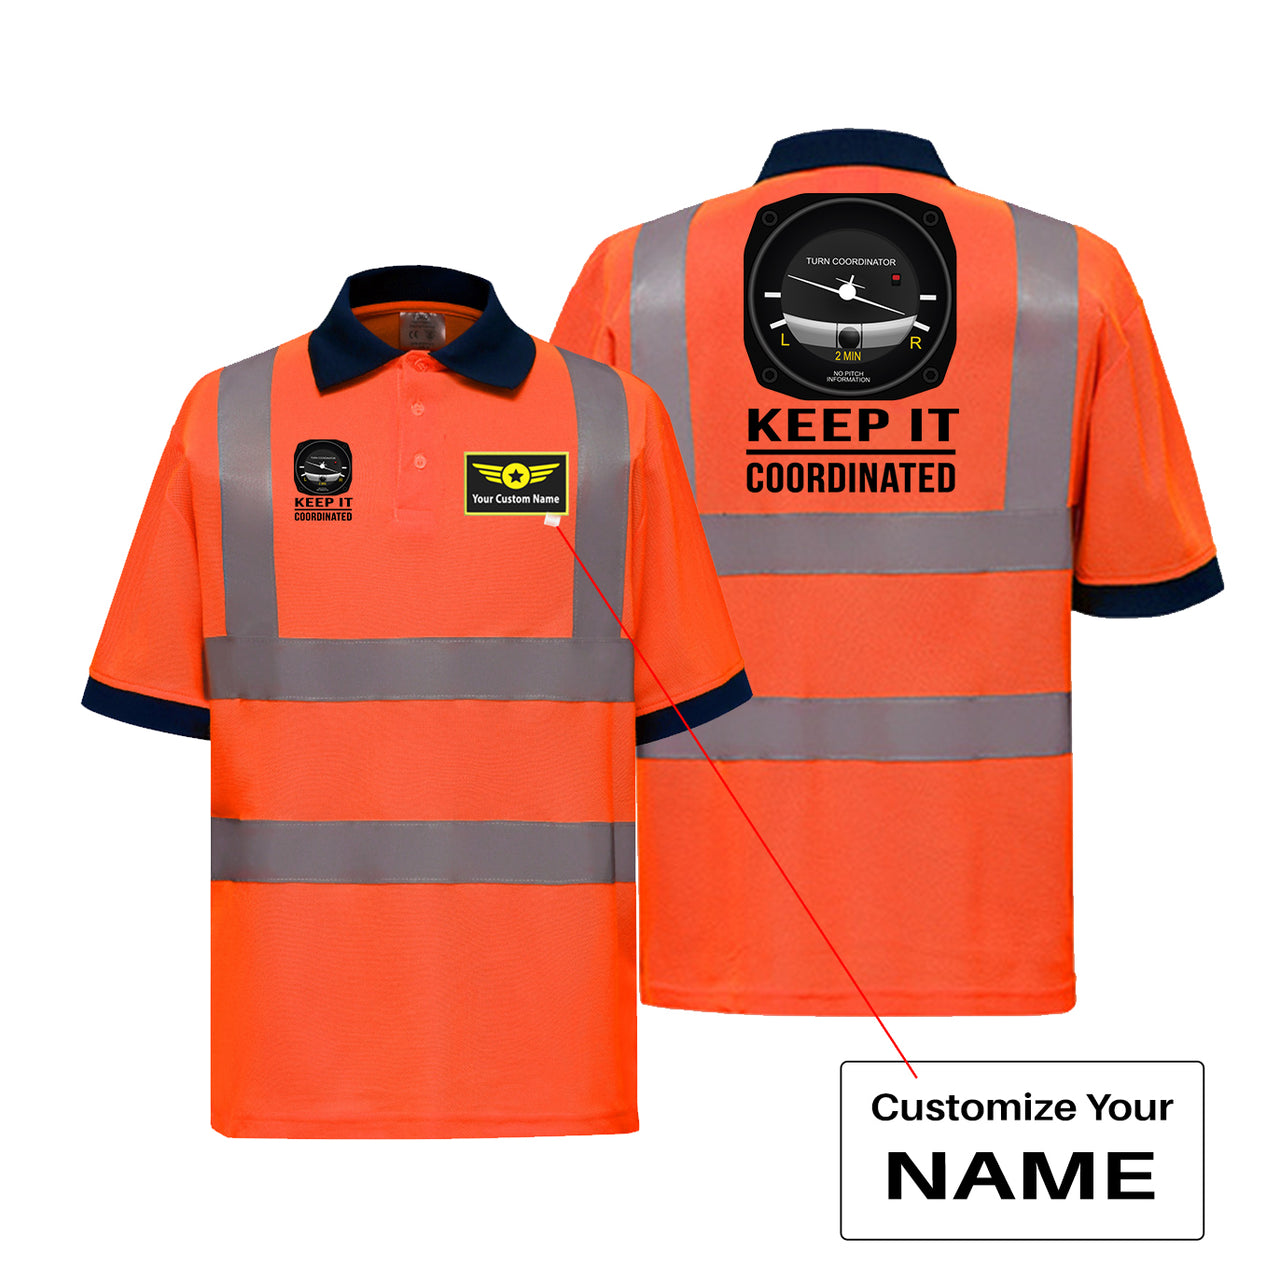 Keep It Coordinated Designed Reflective Polo T-Shirts